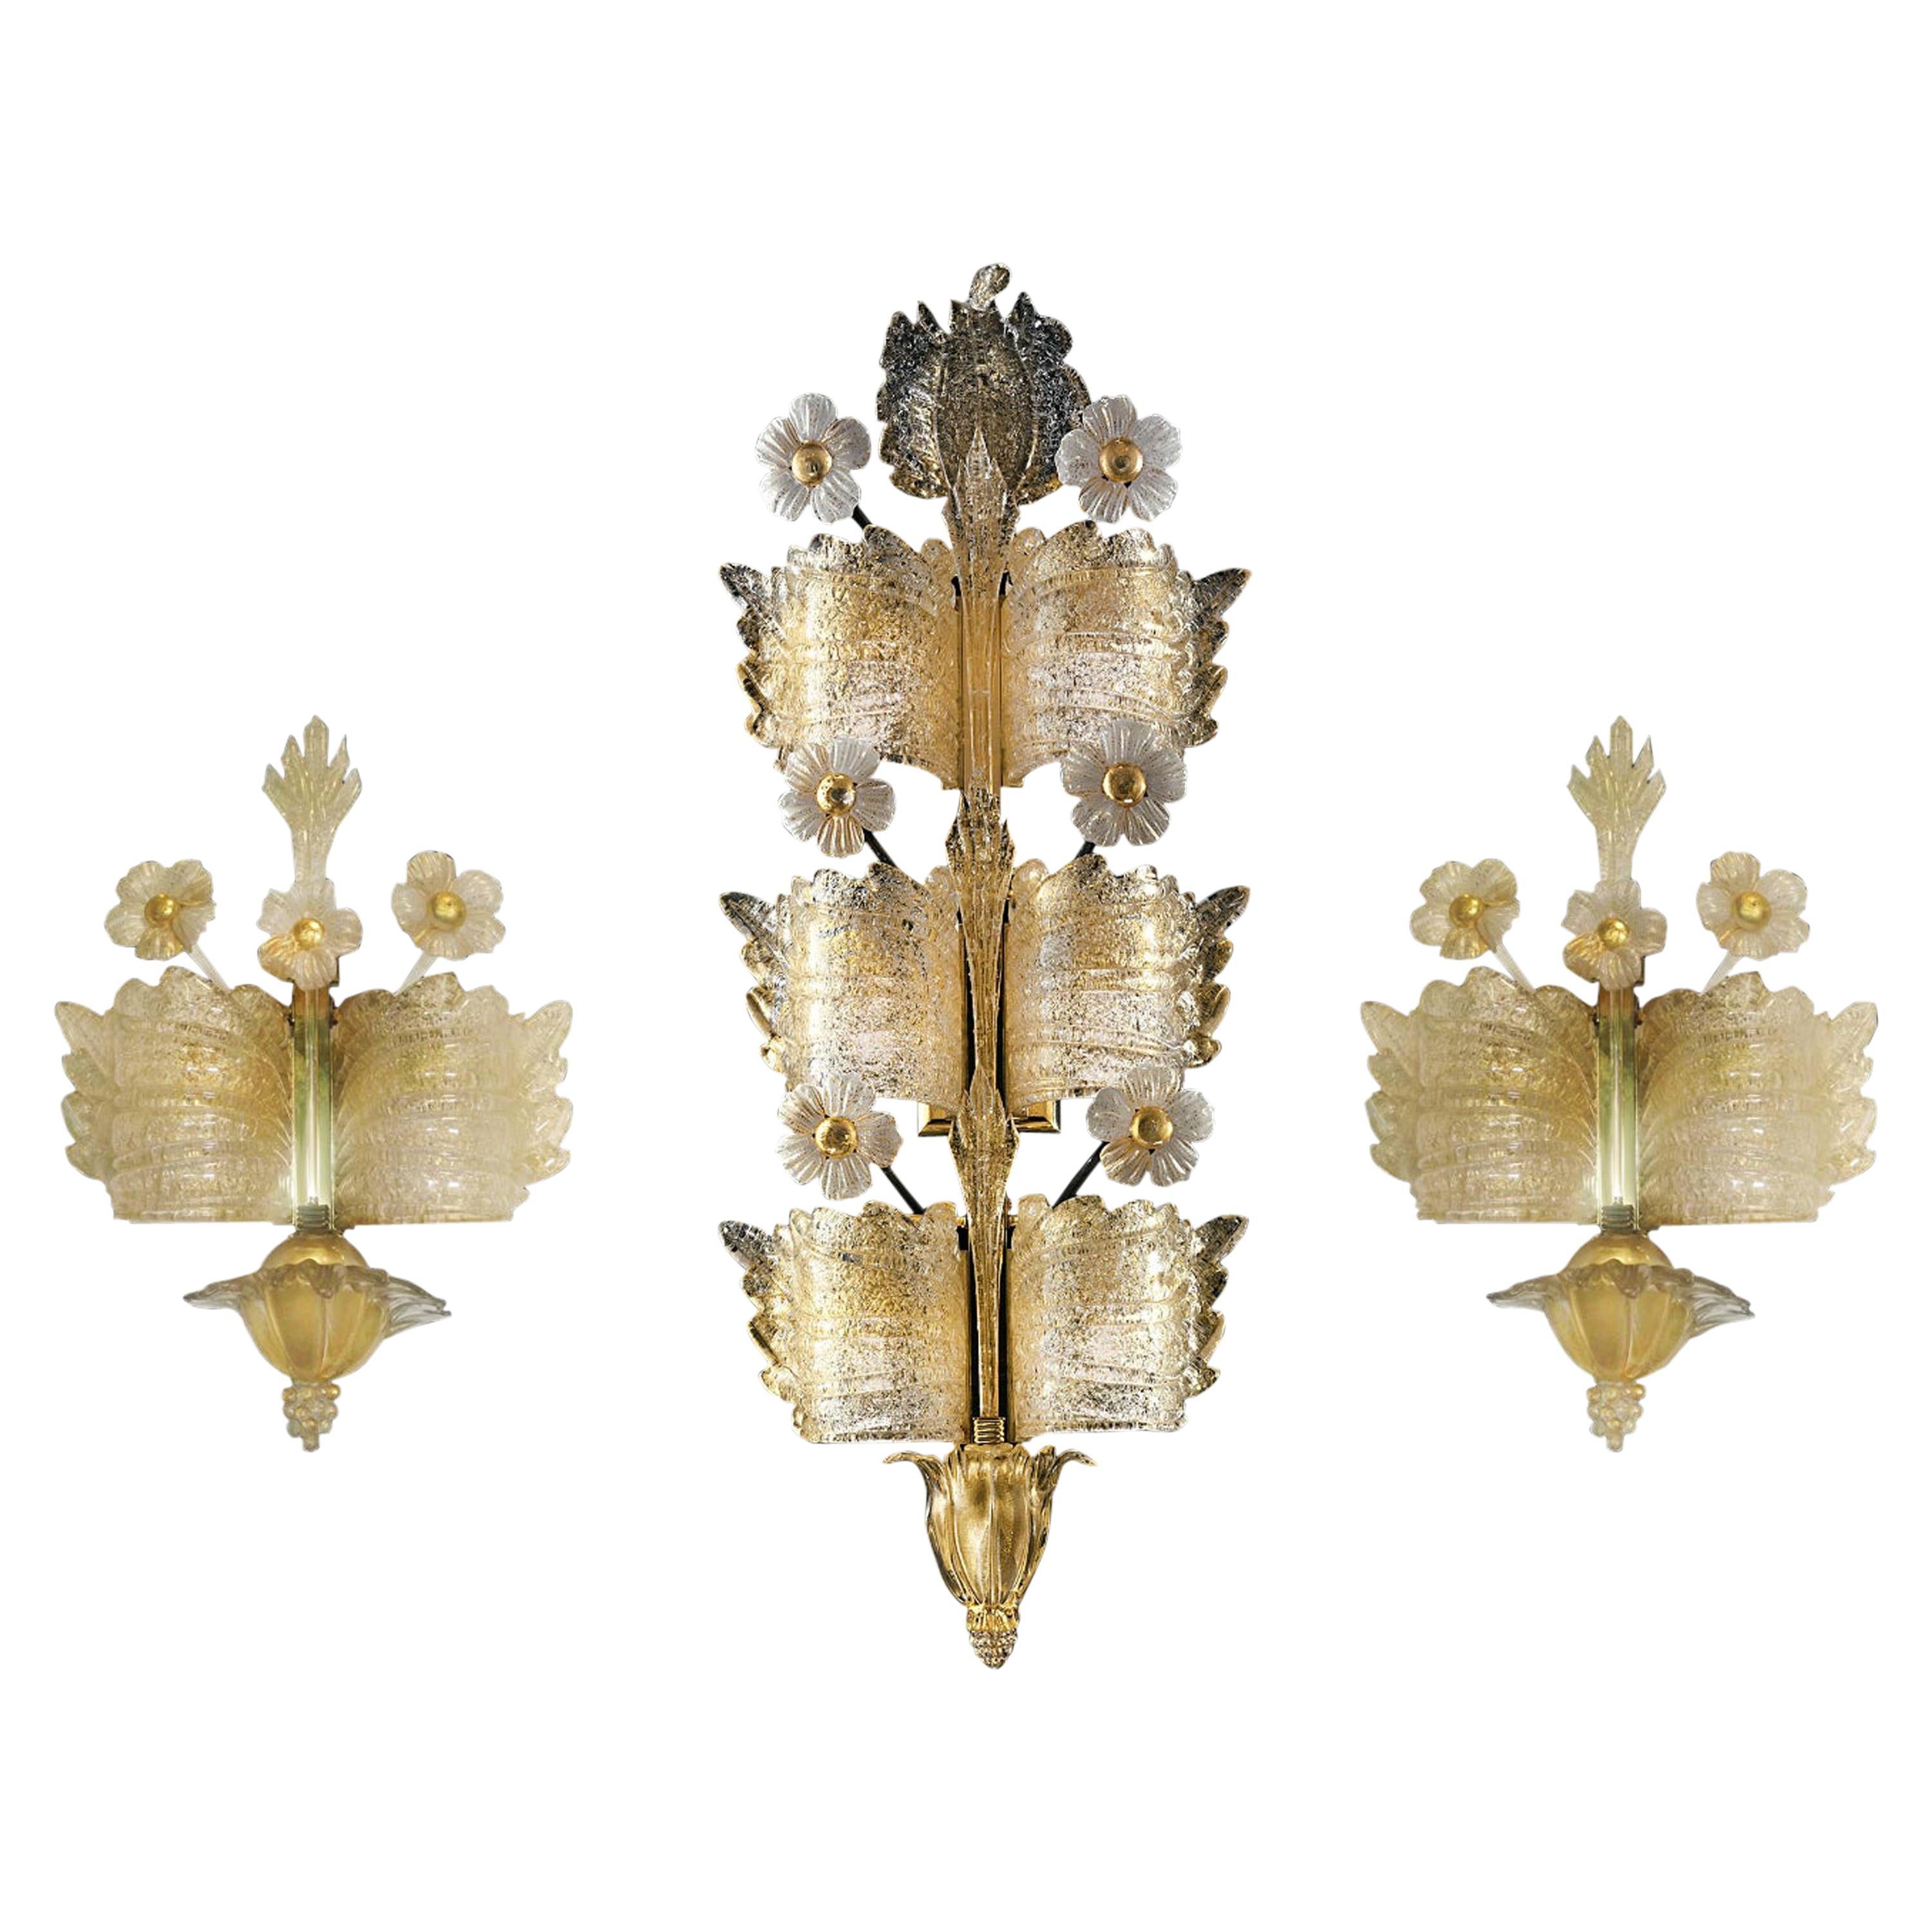 Midcentury Trio of Sconces Grand Hotel by Barovier & Toso, Murano, 1960s For Sale